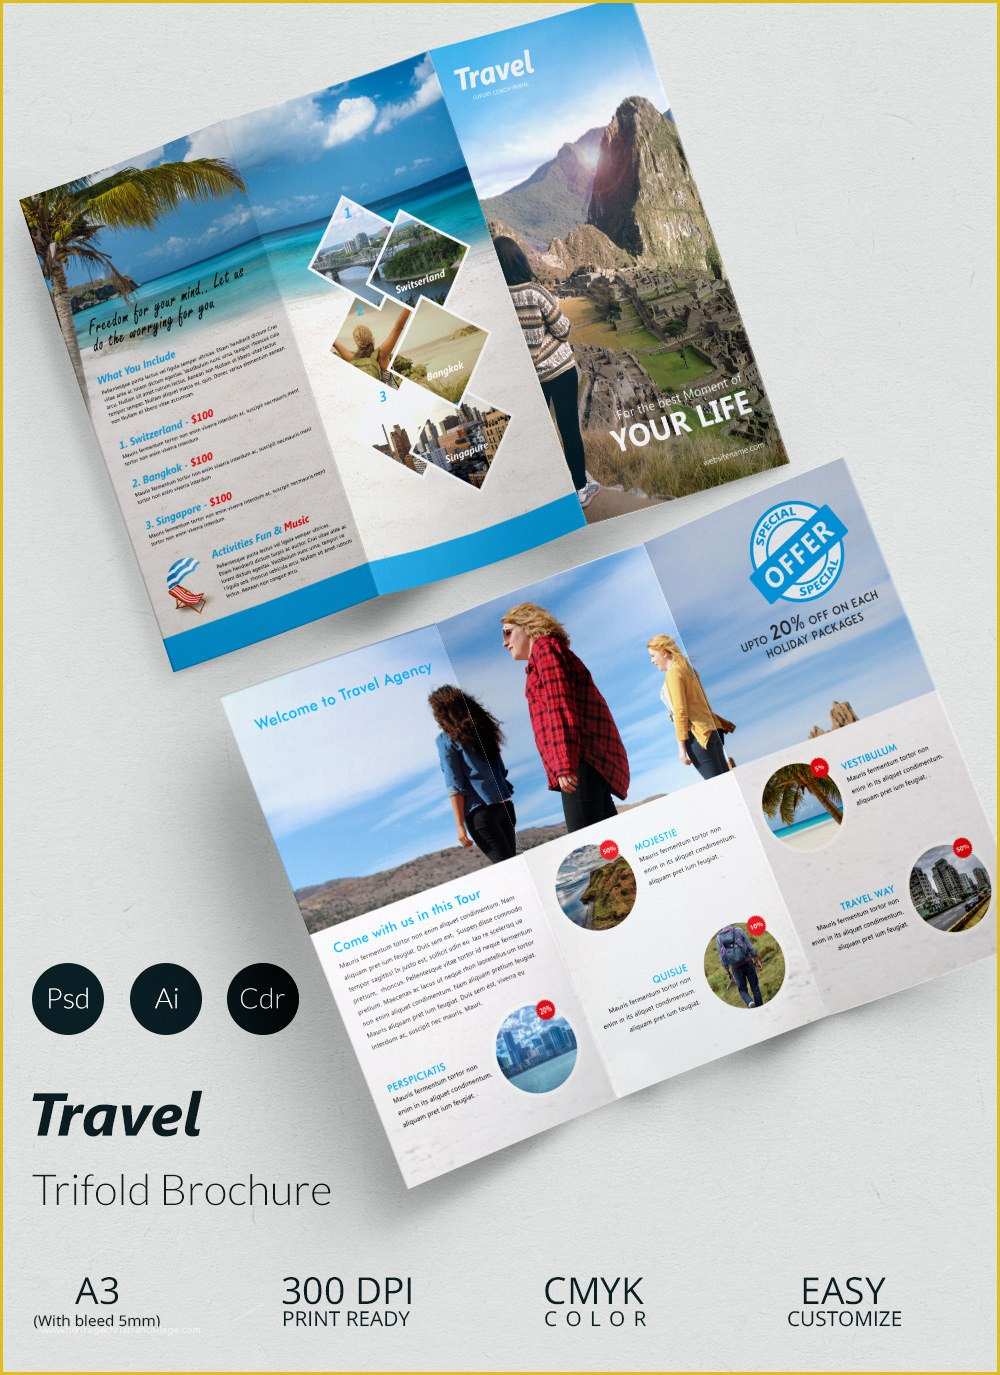 Travel Brochure Template Free Of Travel Brochure Templates 21 Download In Psd Vector